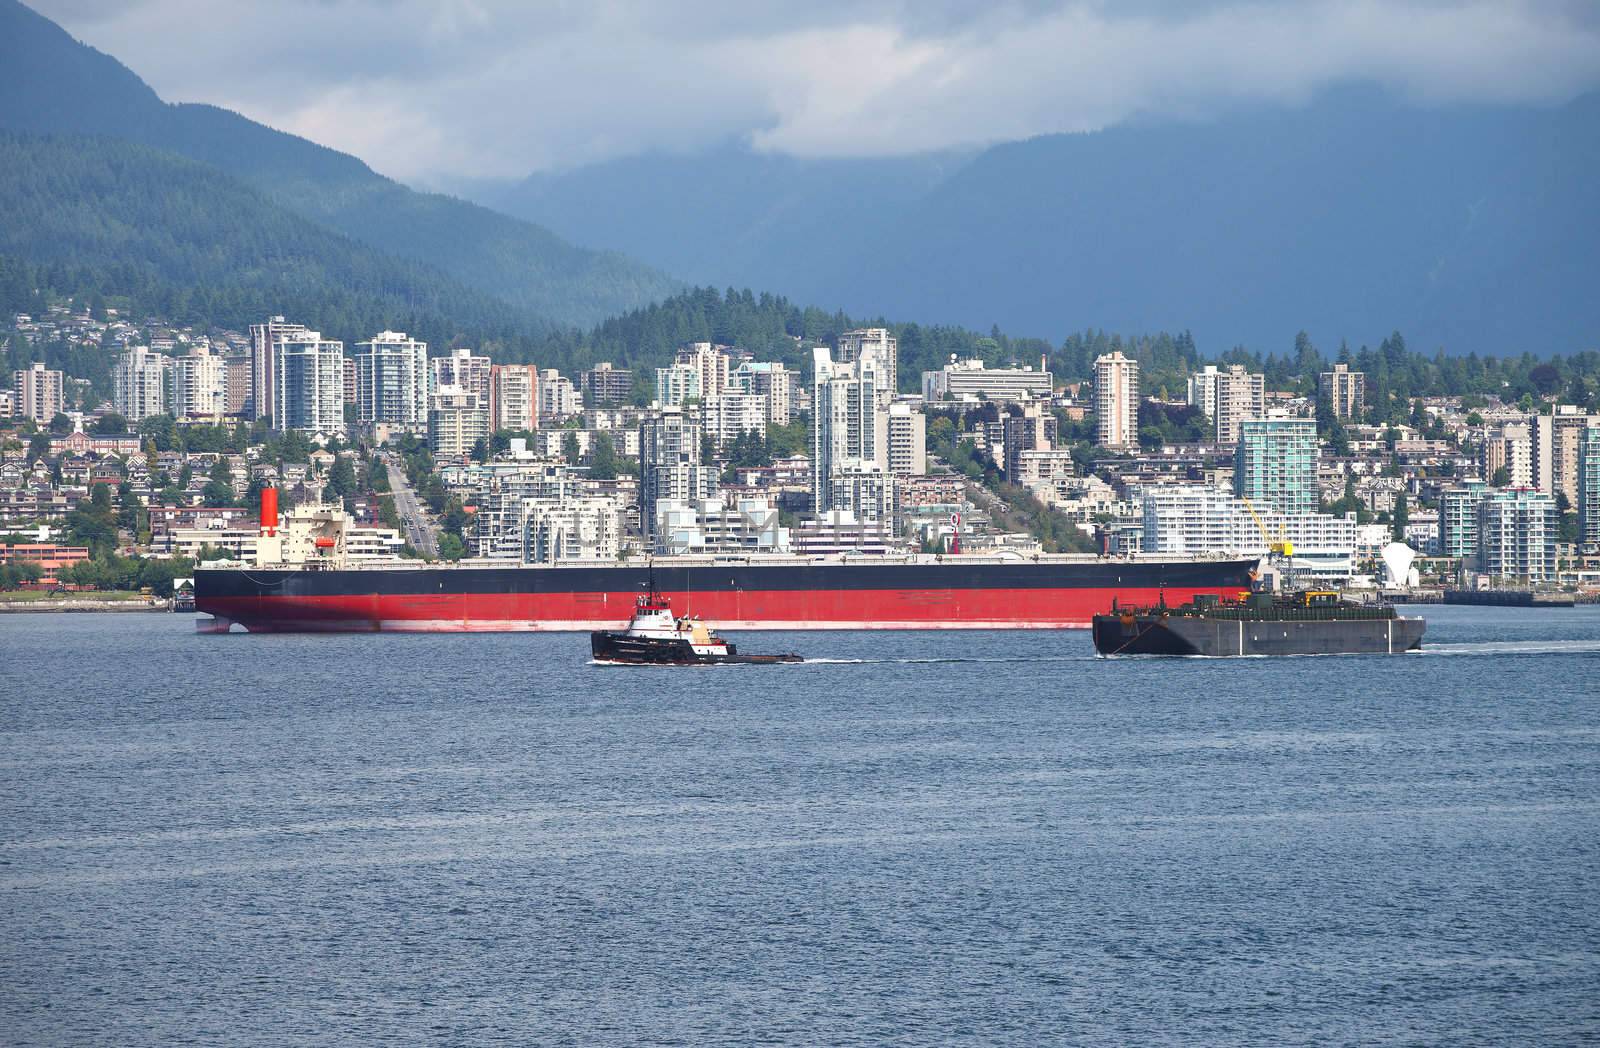 The city of north Vancouver a long tanker and a tug boad pulling a barge.